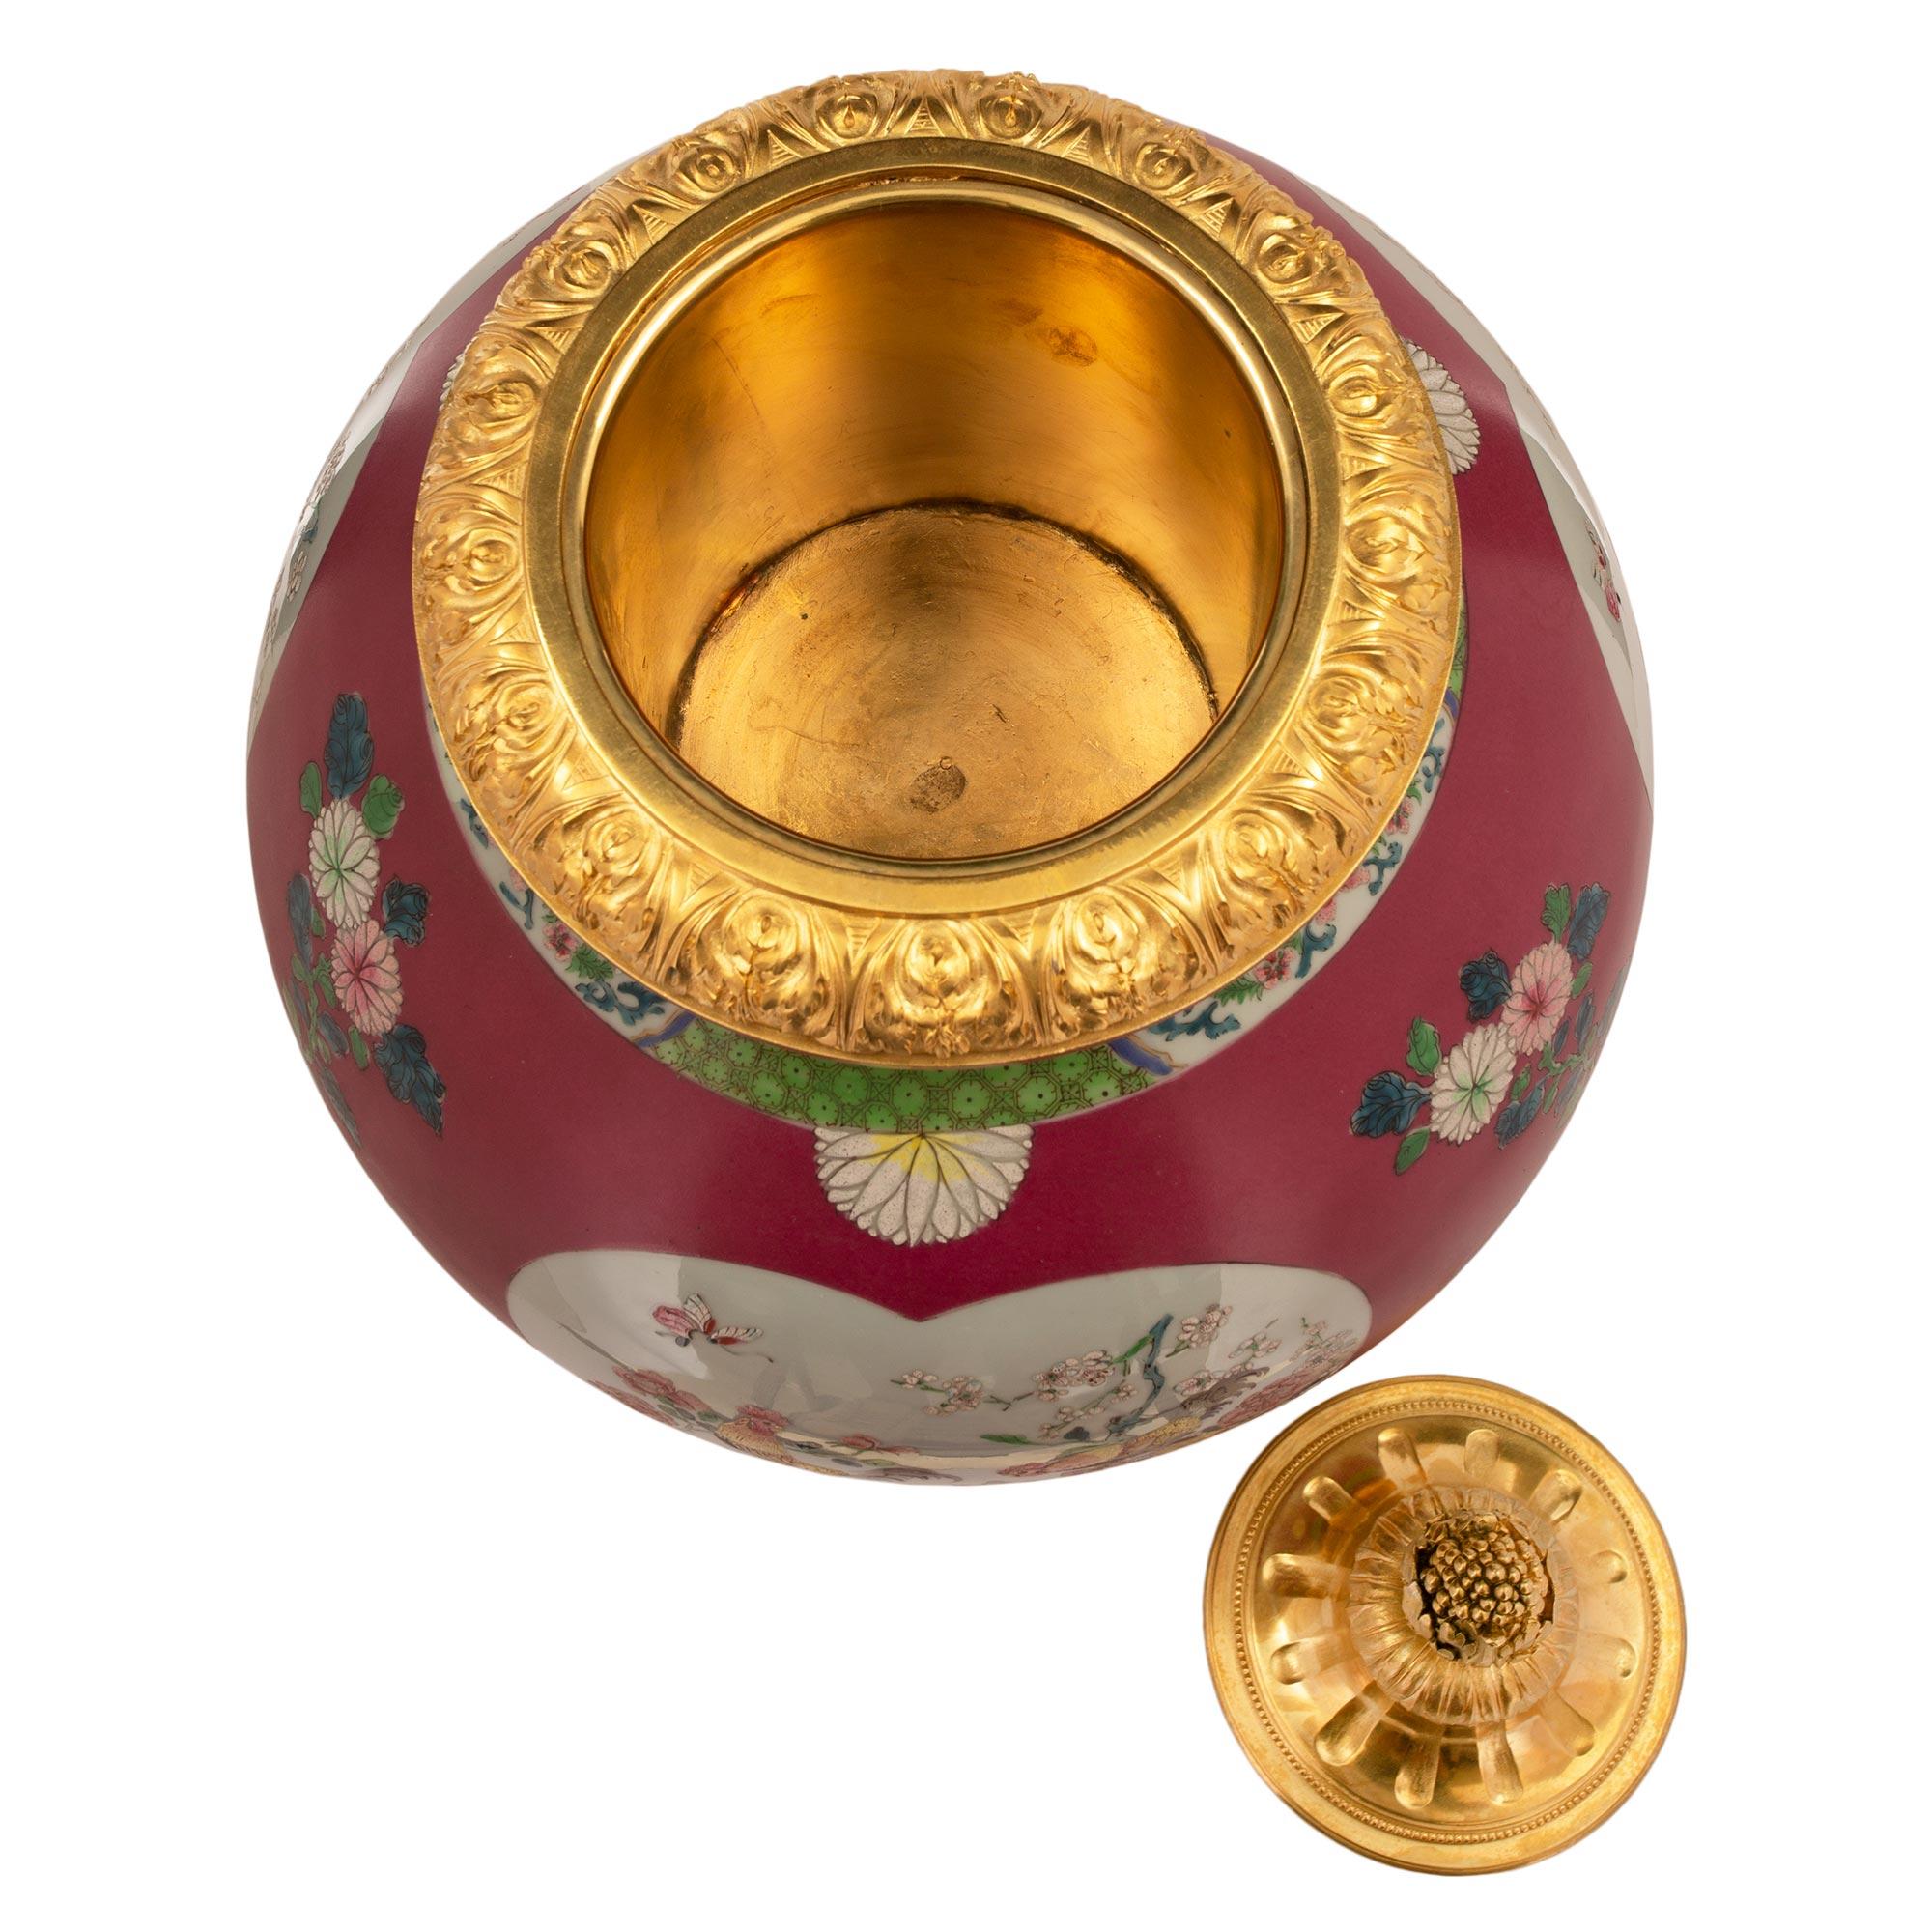 A beautiful 19th century Chinese Export porcelain urn with striking French 19th century Louis XVI st. ormolu mounts. The urn is raised by an elegant square ormolu base with concave corners and fine recessed chased panels and a striking wrap around